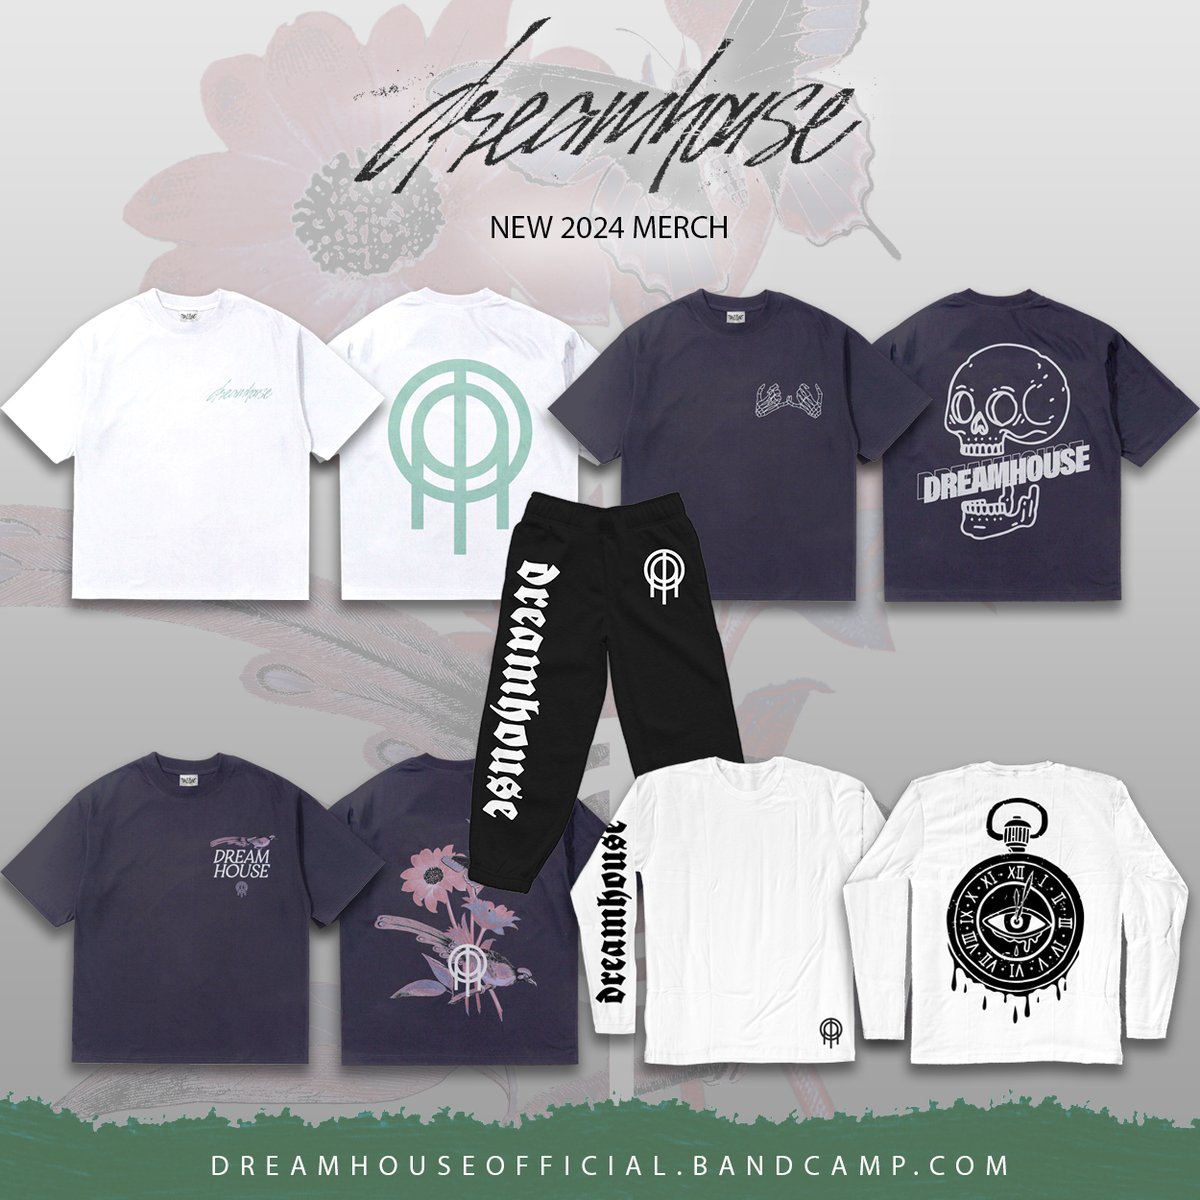 NEW YEAR, NEW MERCH! 🎉 Limited supplies on some of these, head on over to our Bandcamp ⬇️ dreamhouseofficial.bandcamp.com